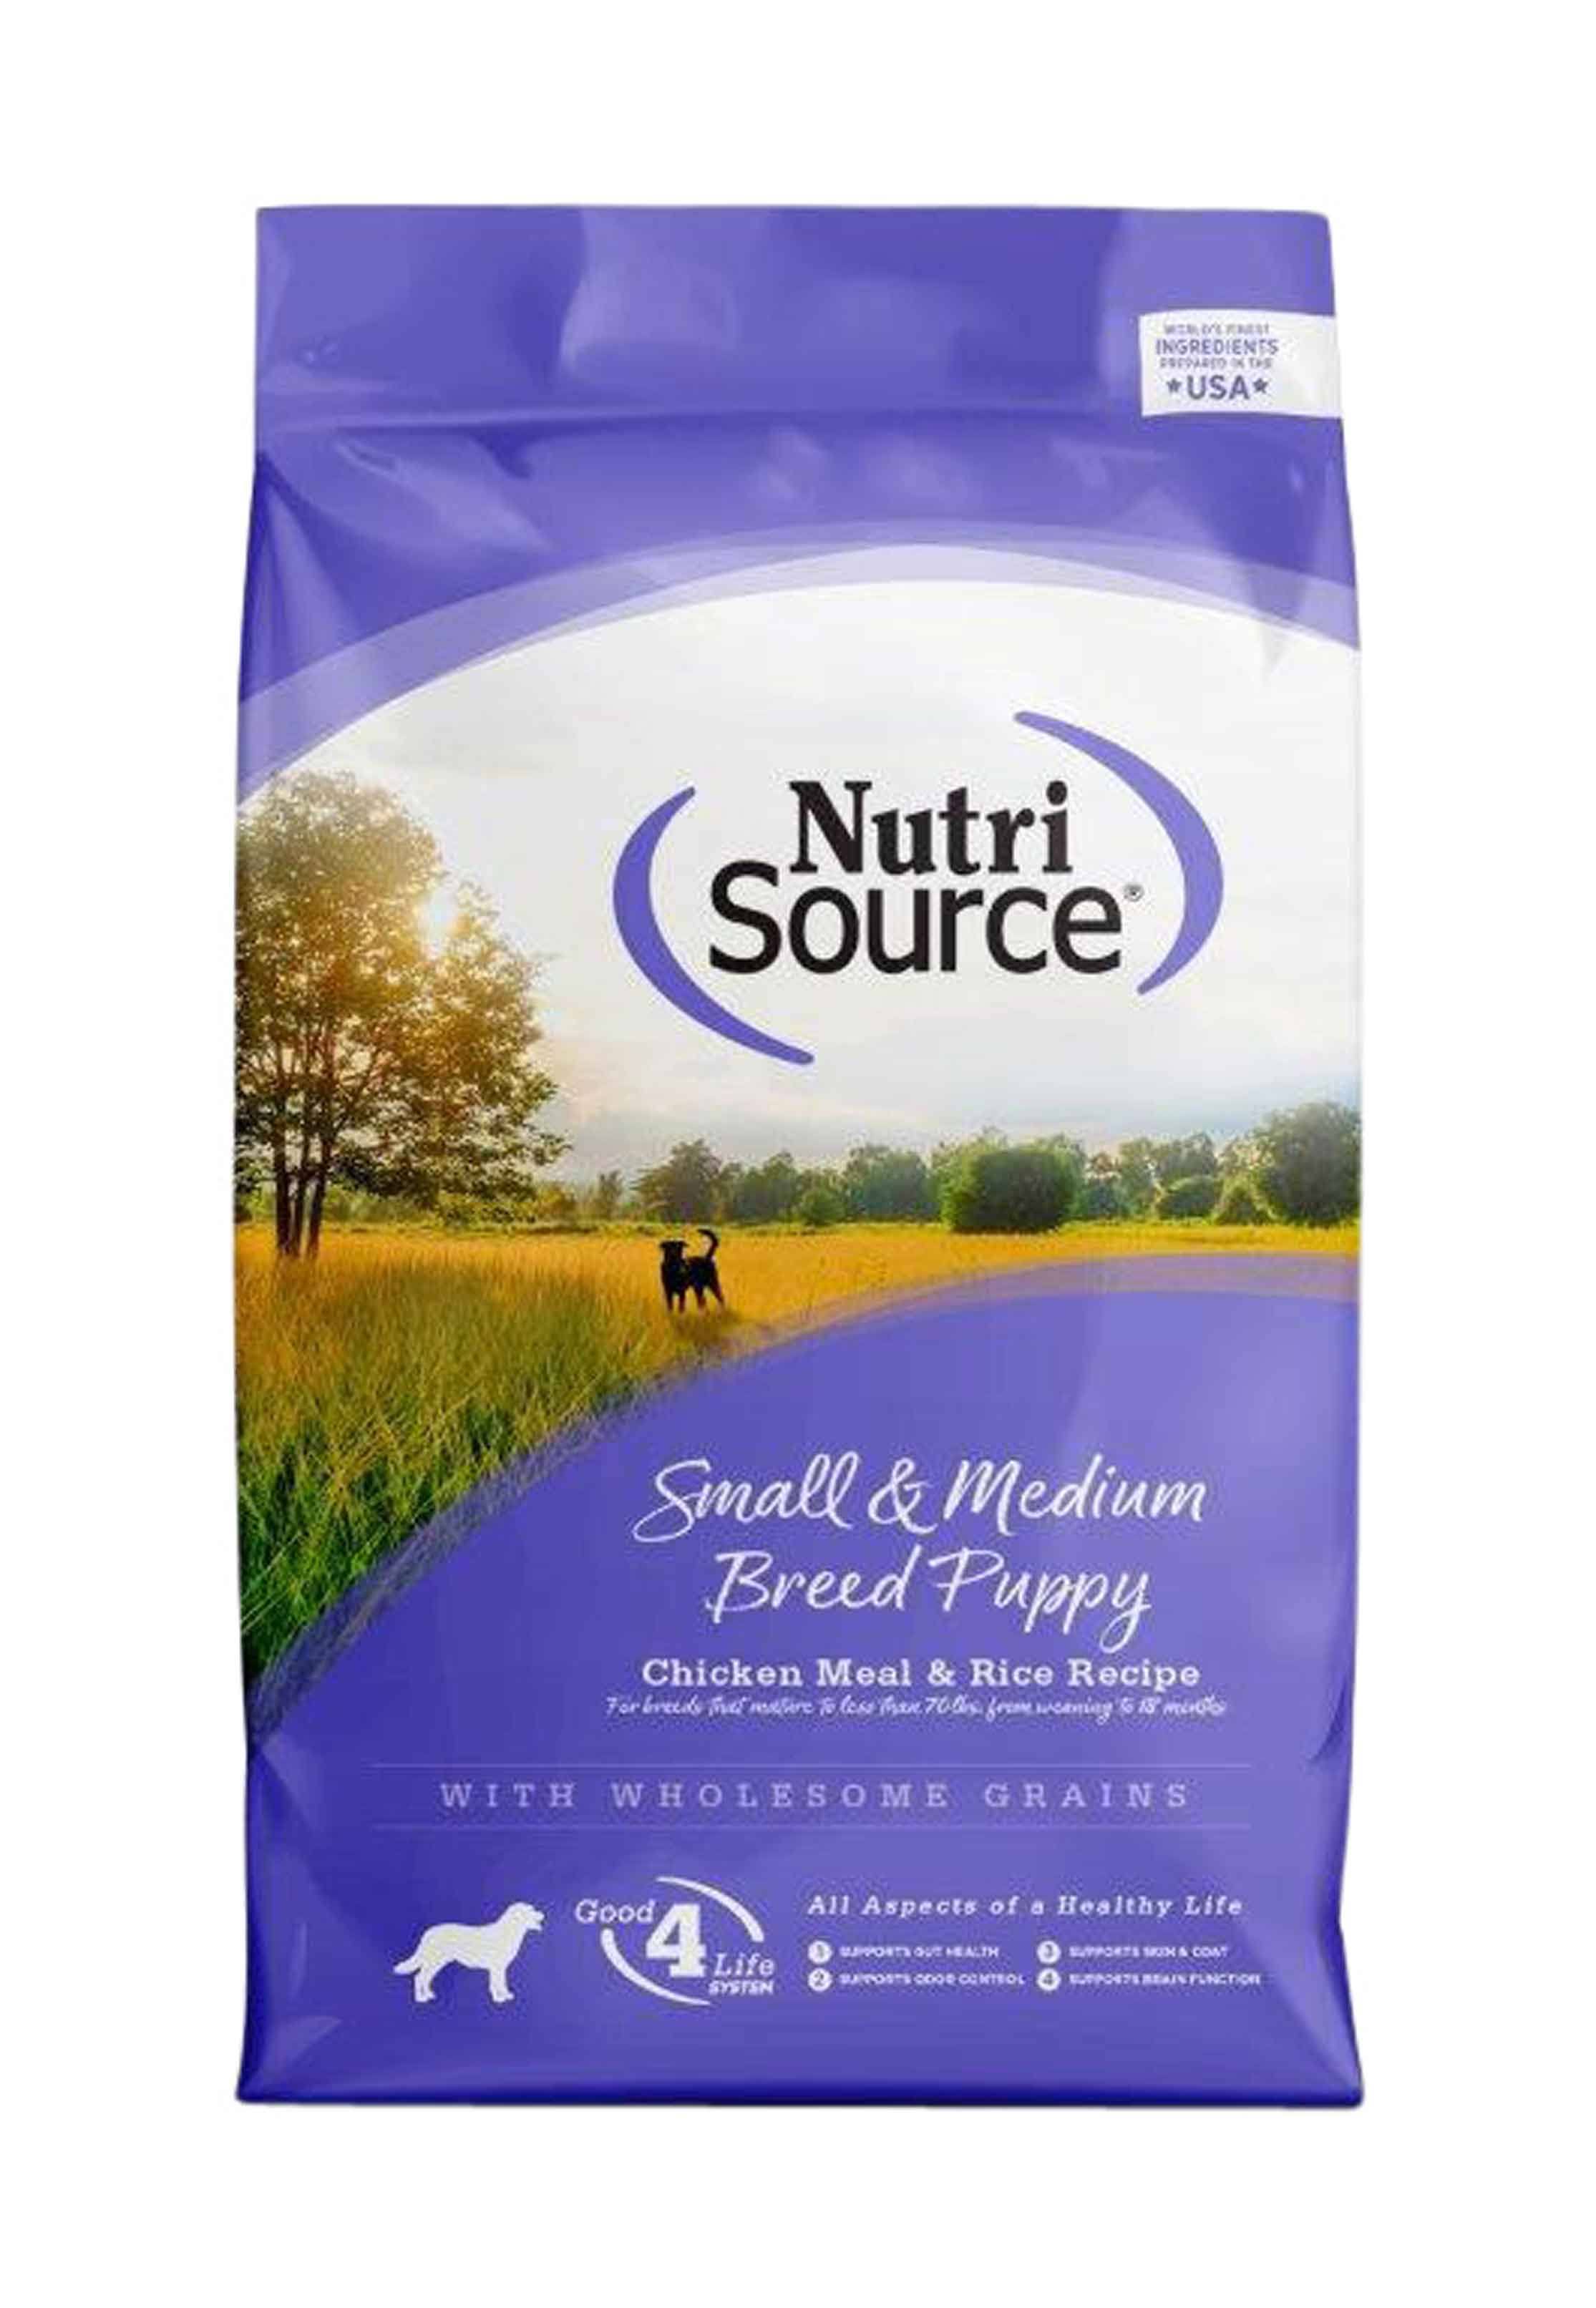 NutriSource Chicken & Rice Small & Medium Breed Puppy Food - 30 lbs